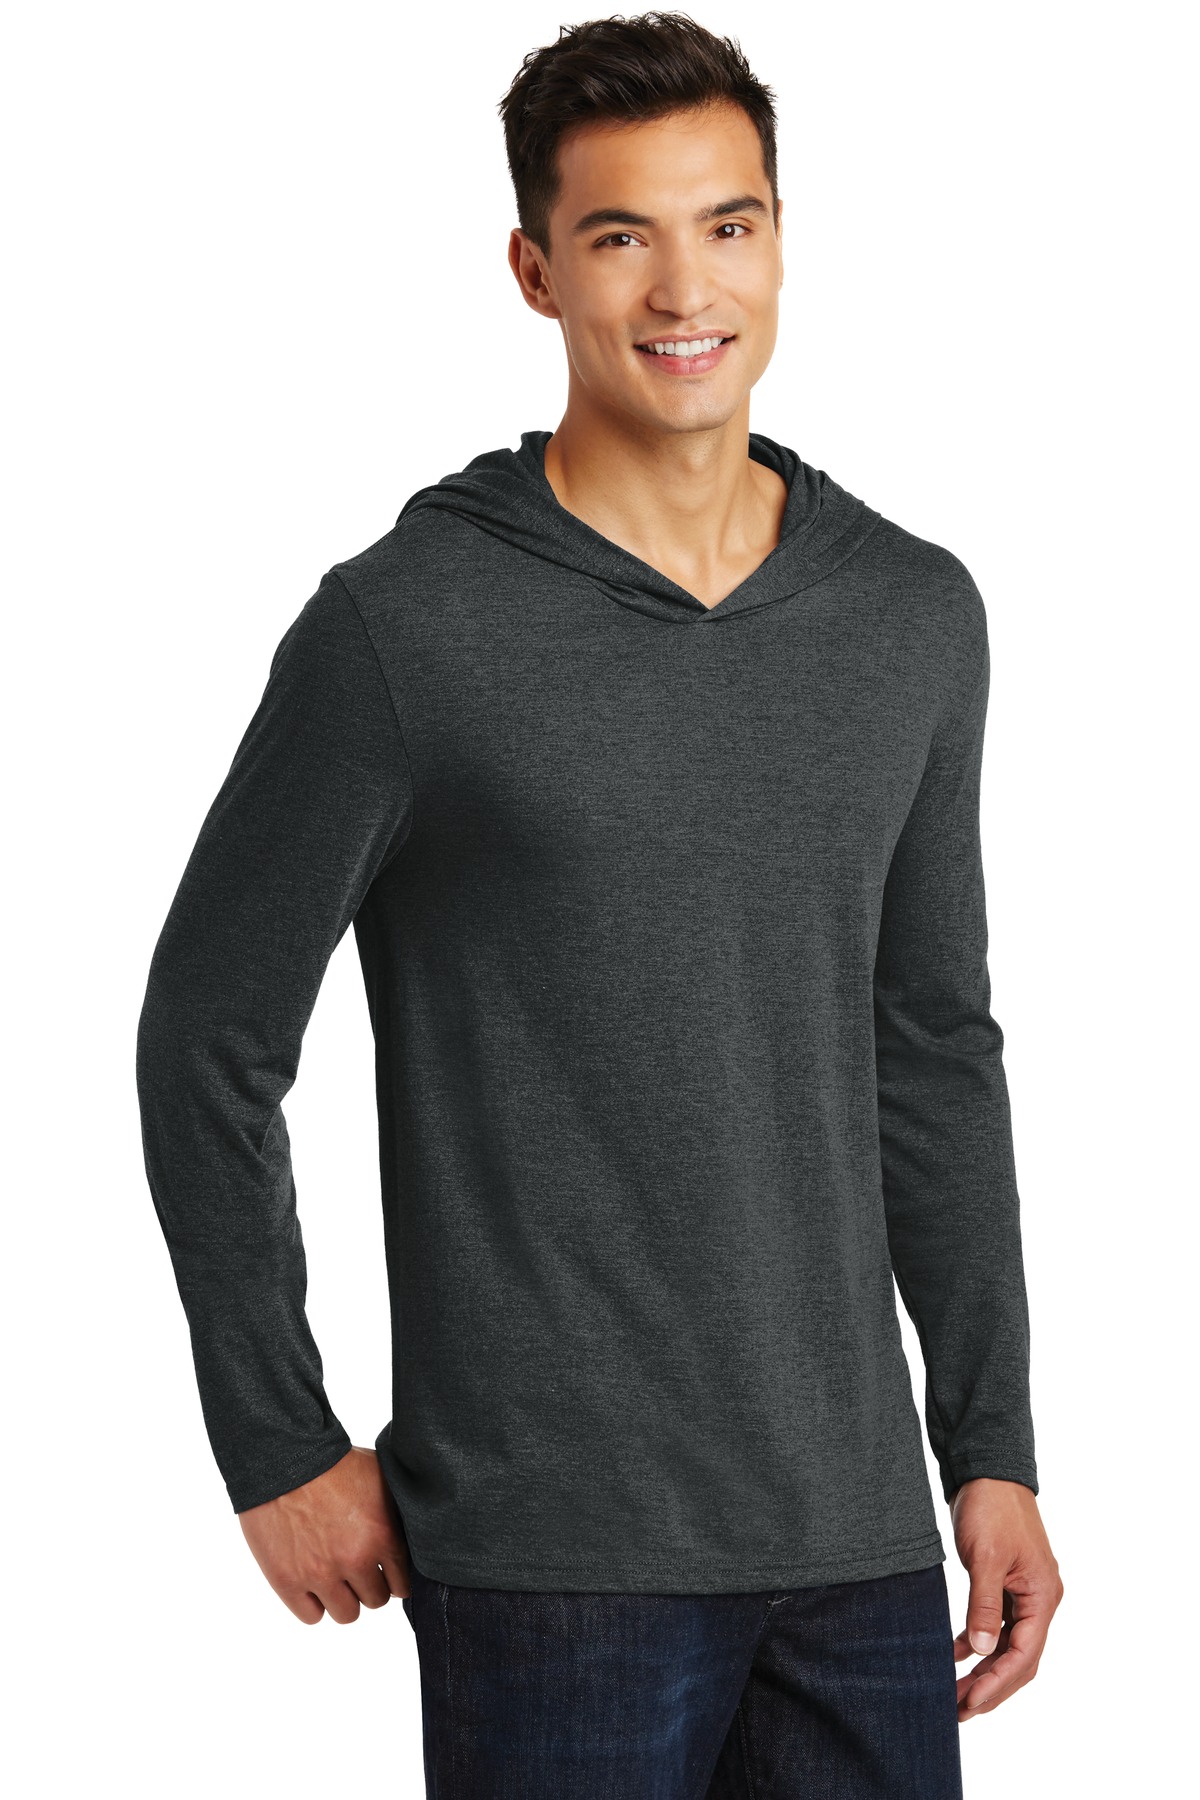 District Made Mens Perfect Tri Long Sleeve Hoodie-S (Black Frost) - image 4 of 6